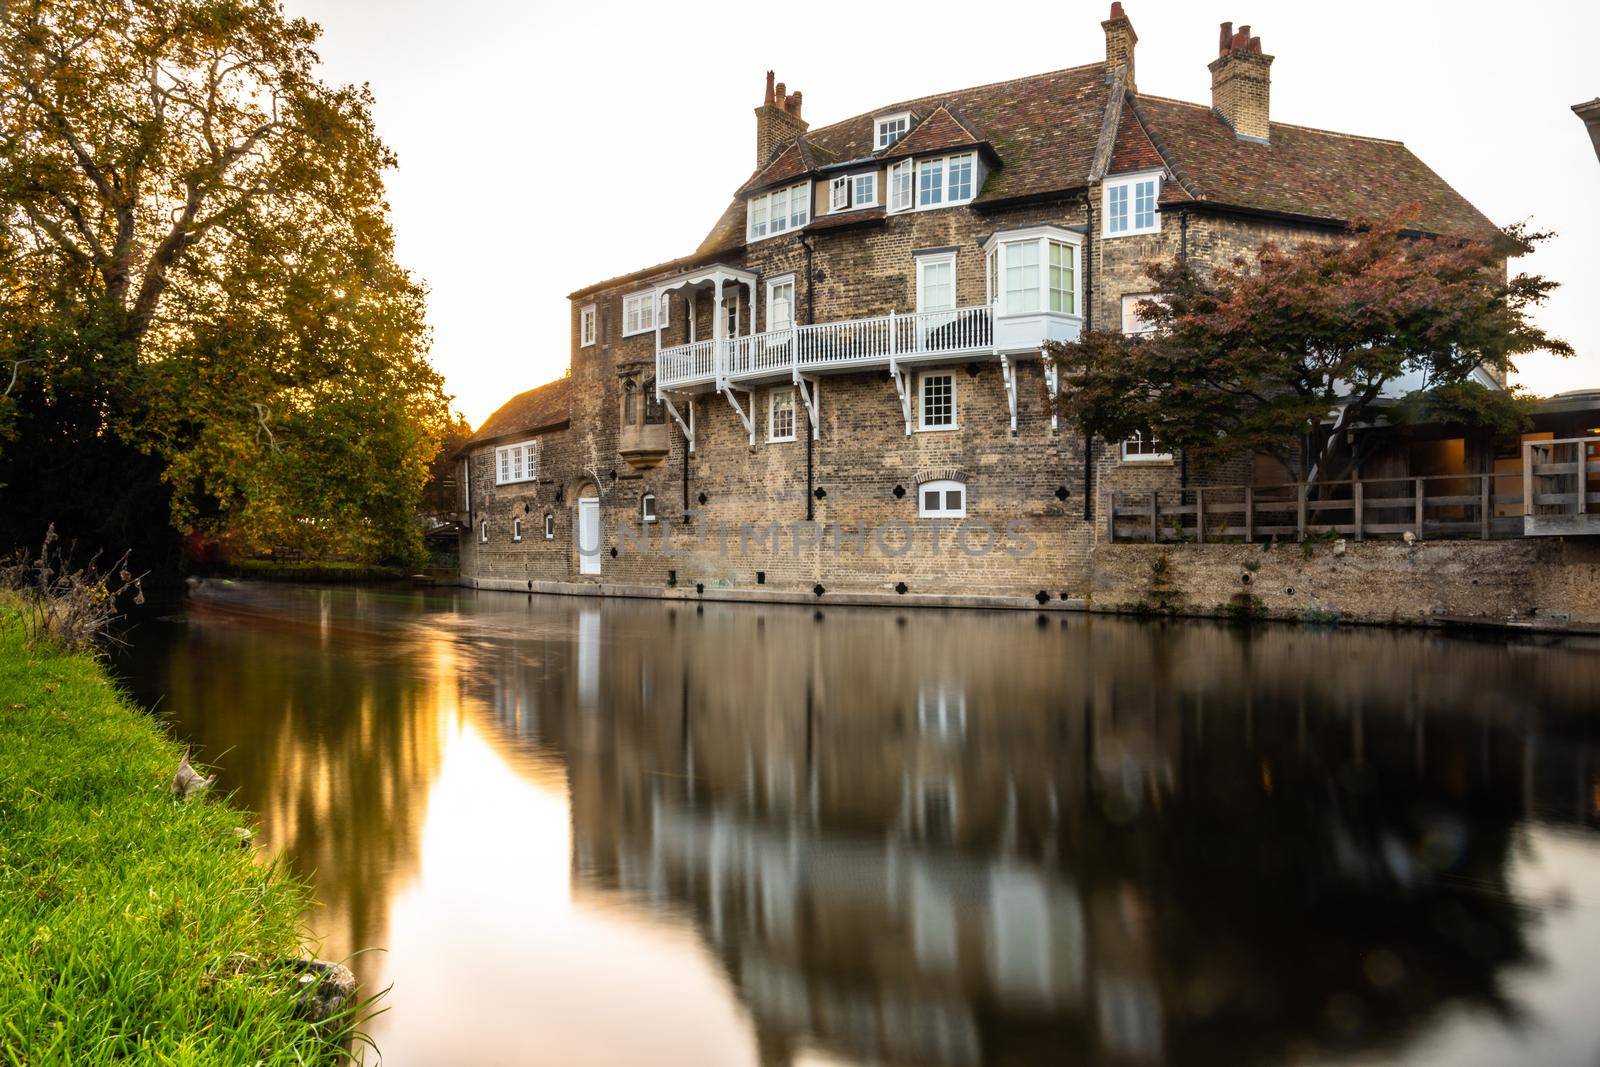 Long exposure of typical Cambridge building by the river in late afternoon light